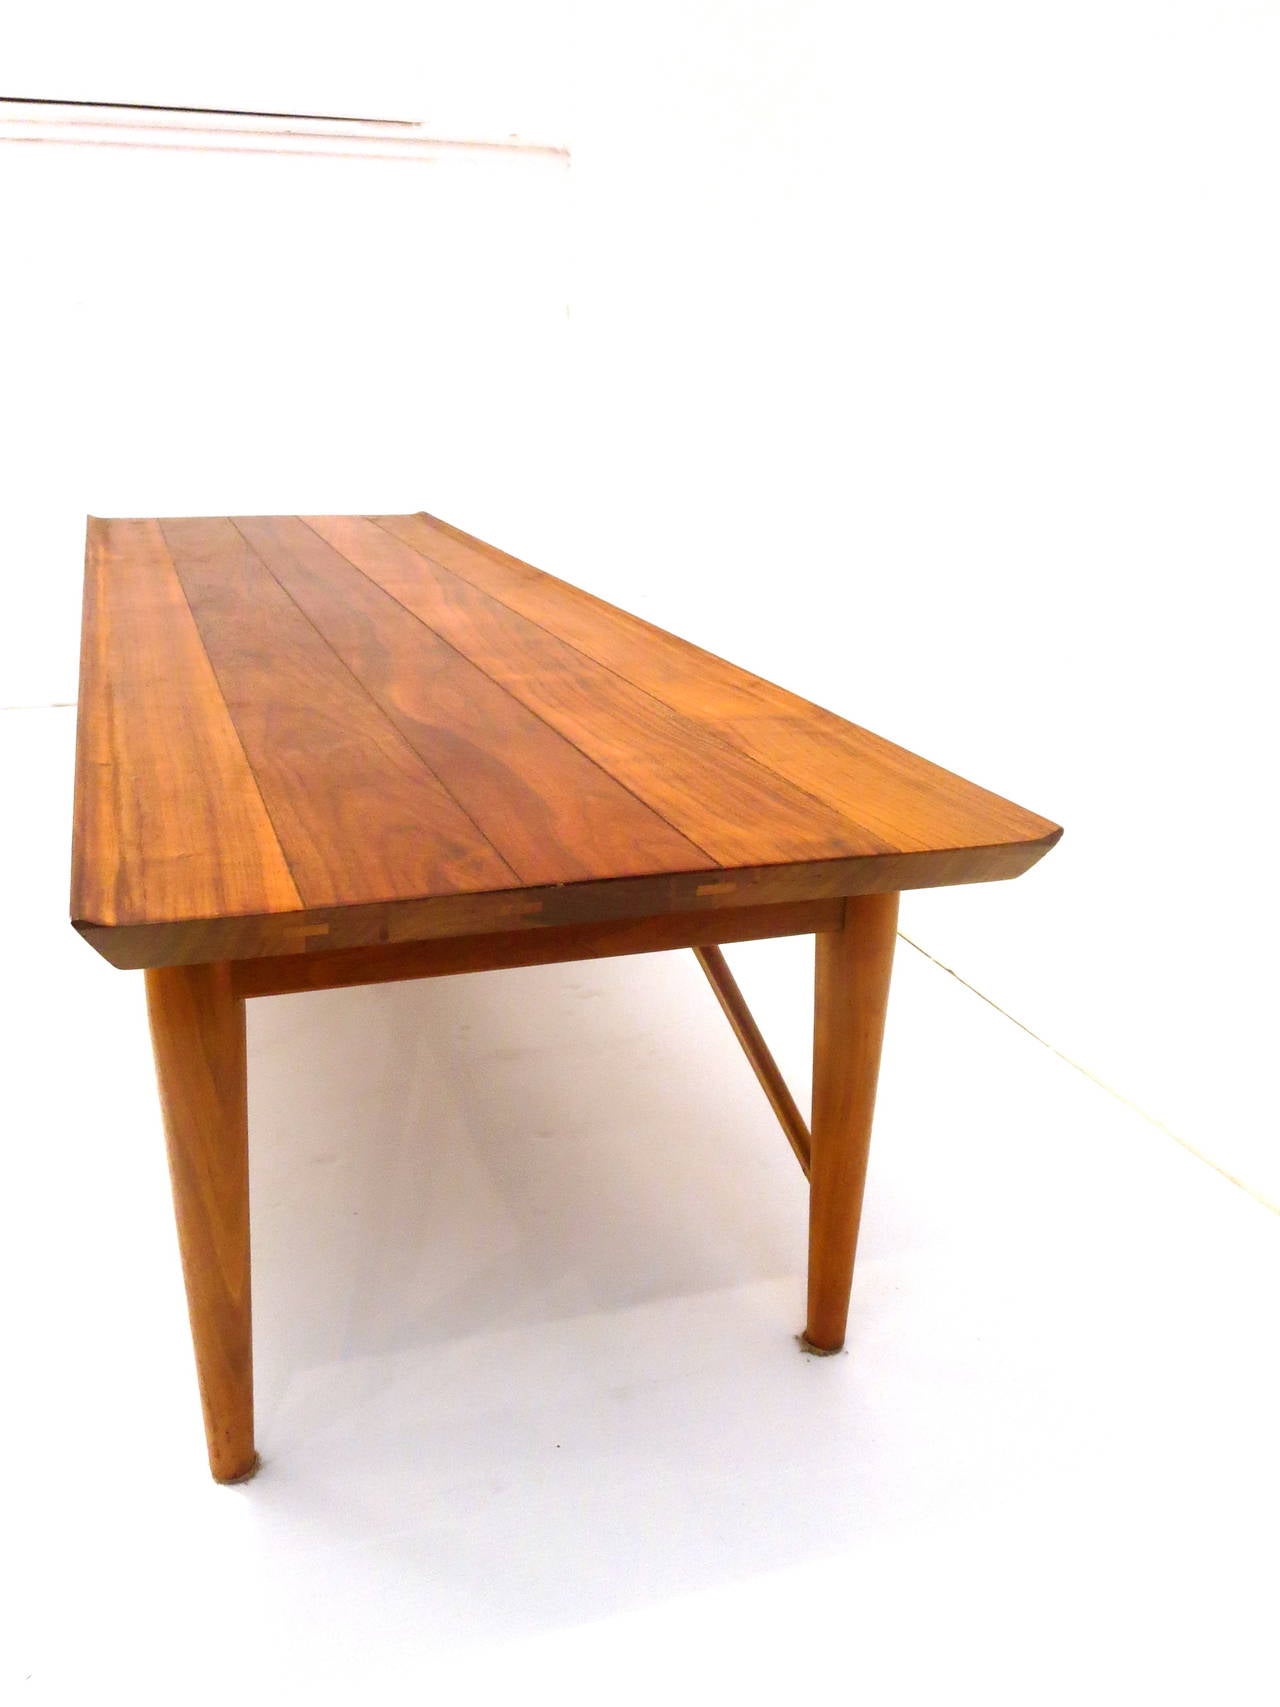 Beautiful craftsmanship on this solid walnut coffee table in the style of Nakashima, circa 1960s made by Heritage completely restored and refinished great condition raised edge and dove tail ends with pull drawer.